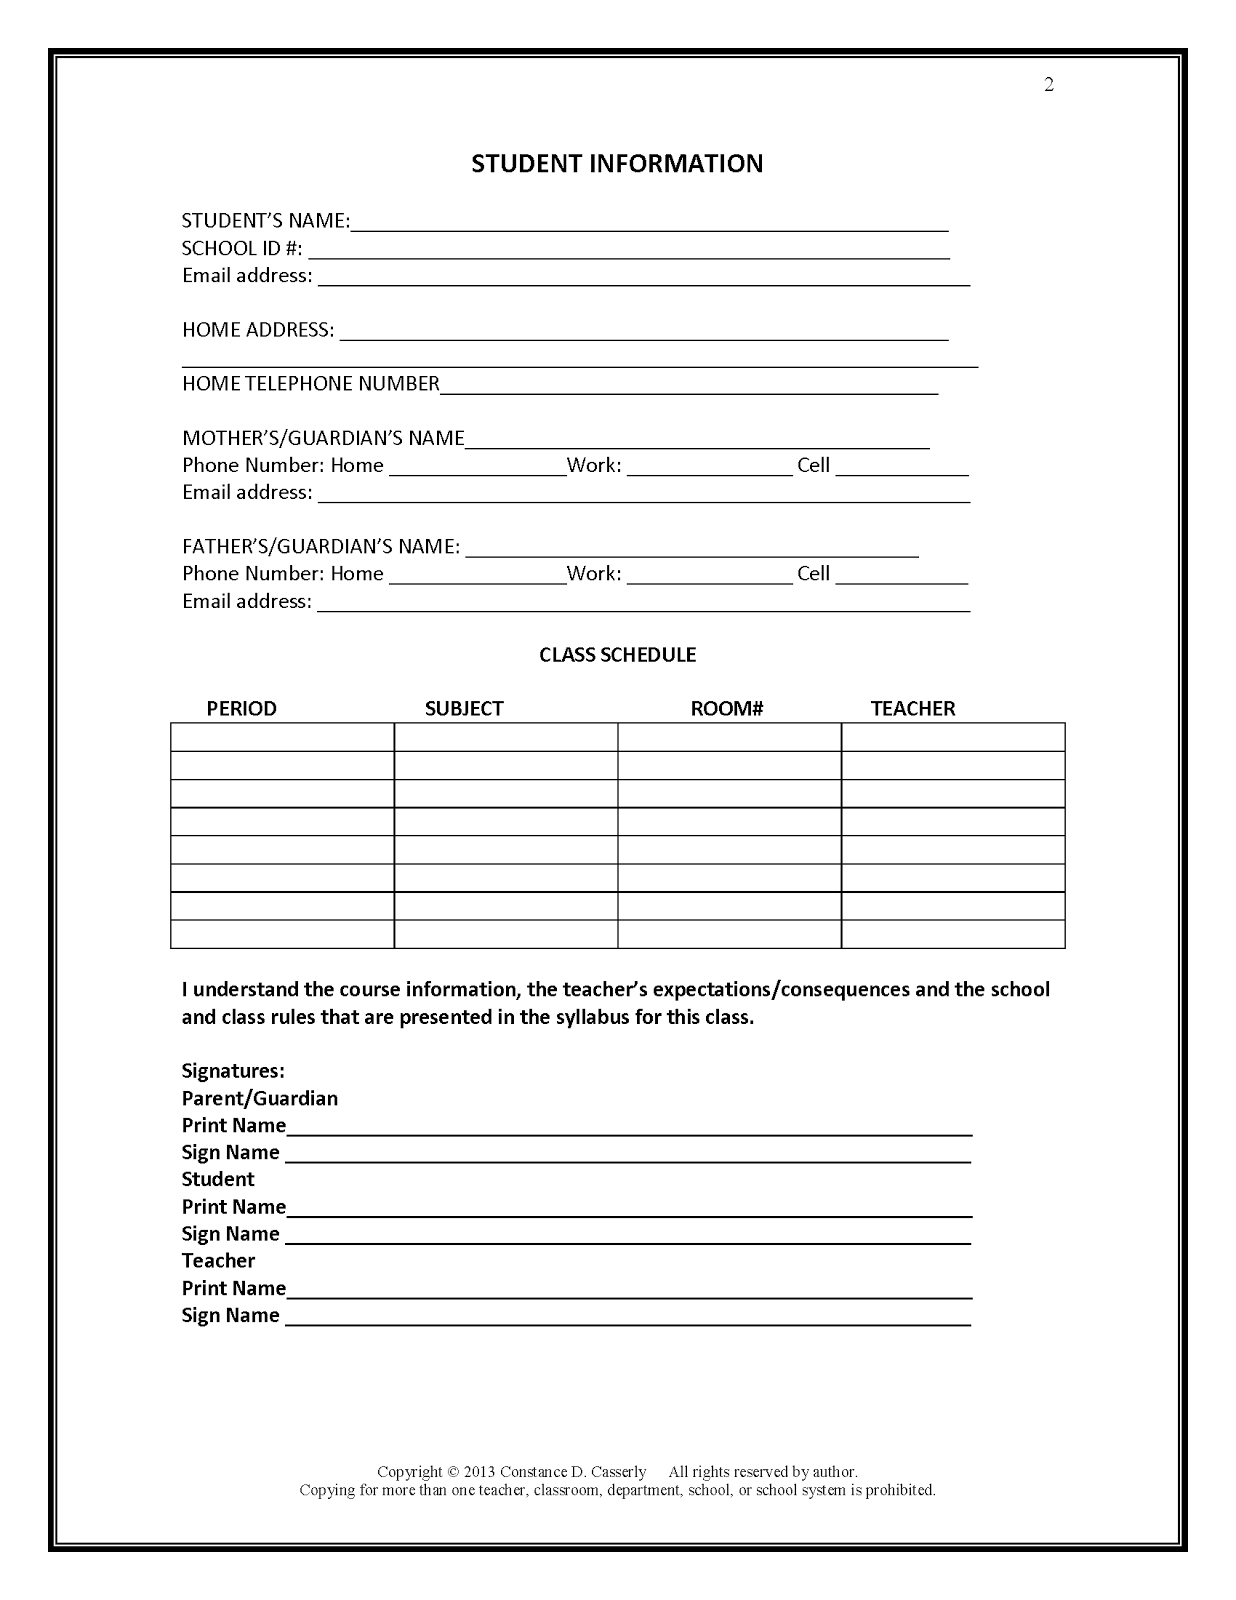 27 Images Of Student Information Form Template | Bfegy With Throughout Student Information Card Template